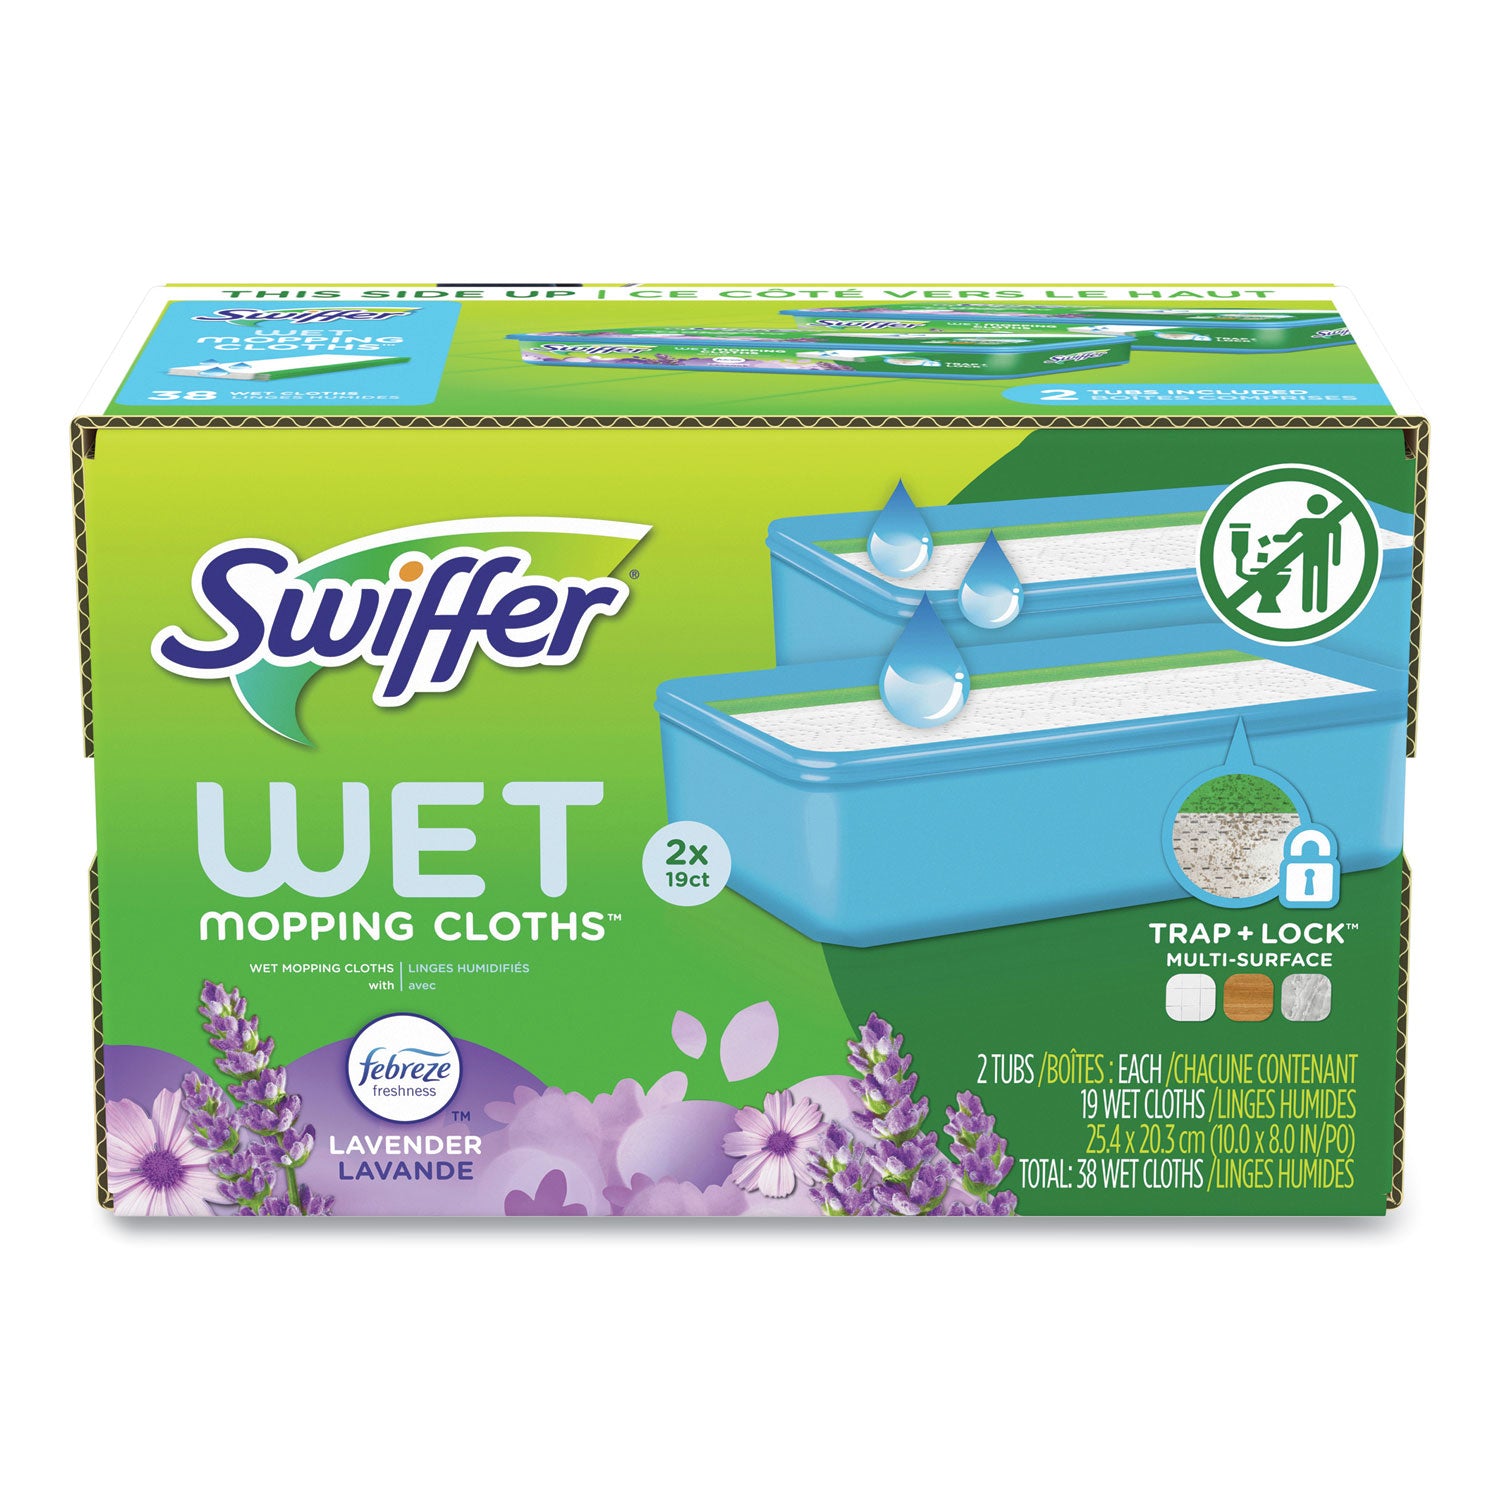 sweeper-trap-+-lock-wet-mop-cloth-8-x-10-white-lavender-scent-38-pack_pgc00743 - 2